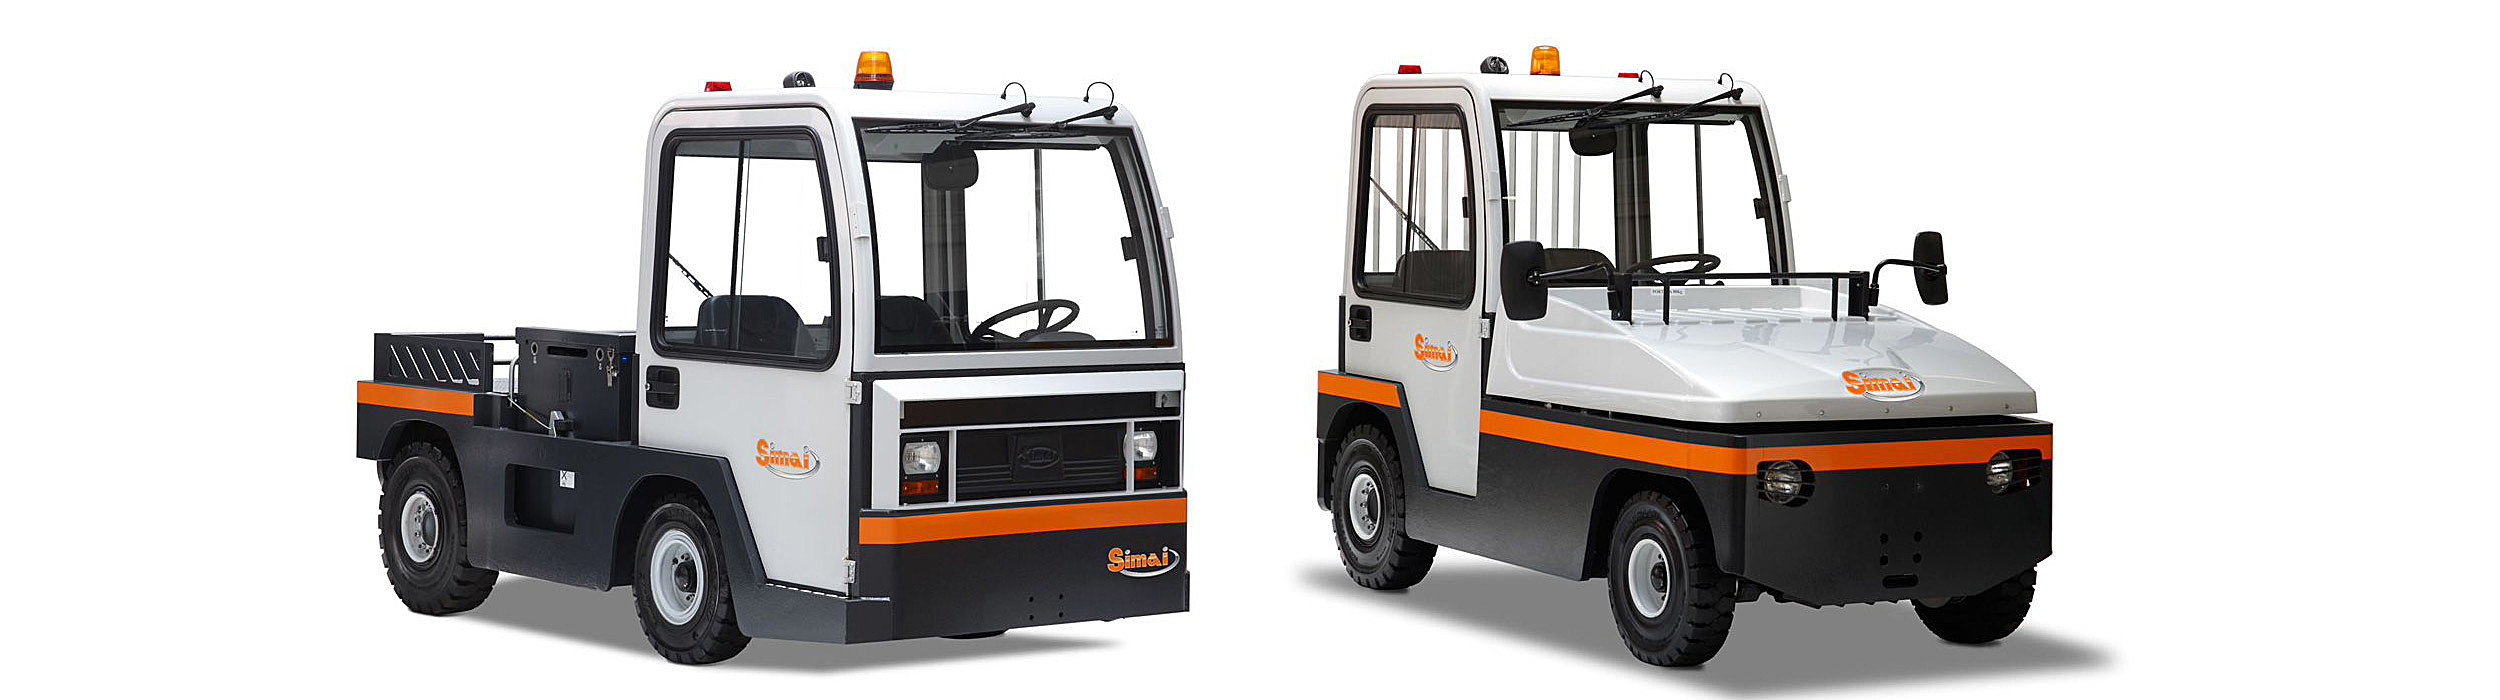 Product images of Simai trucks